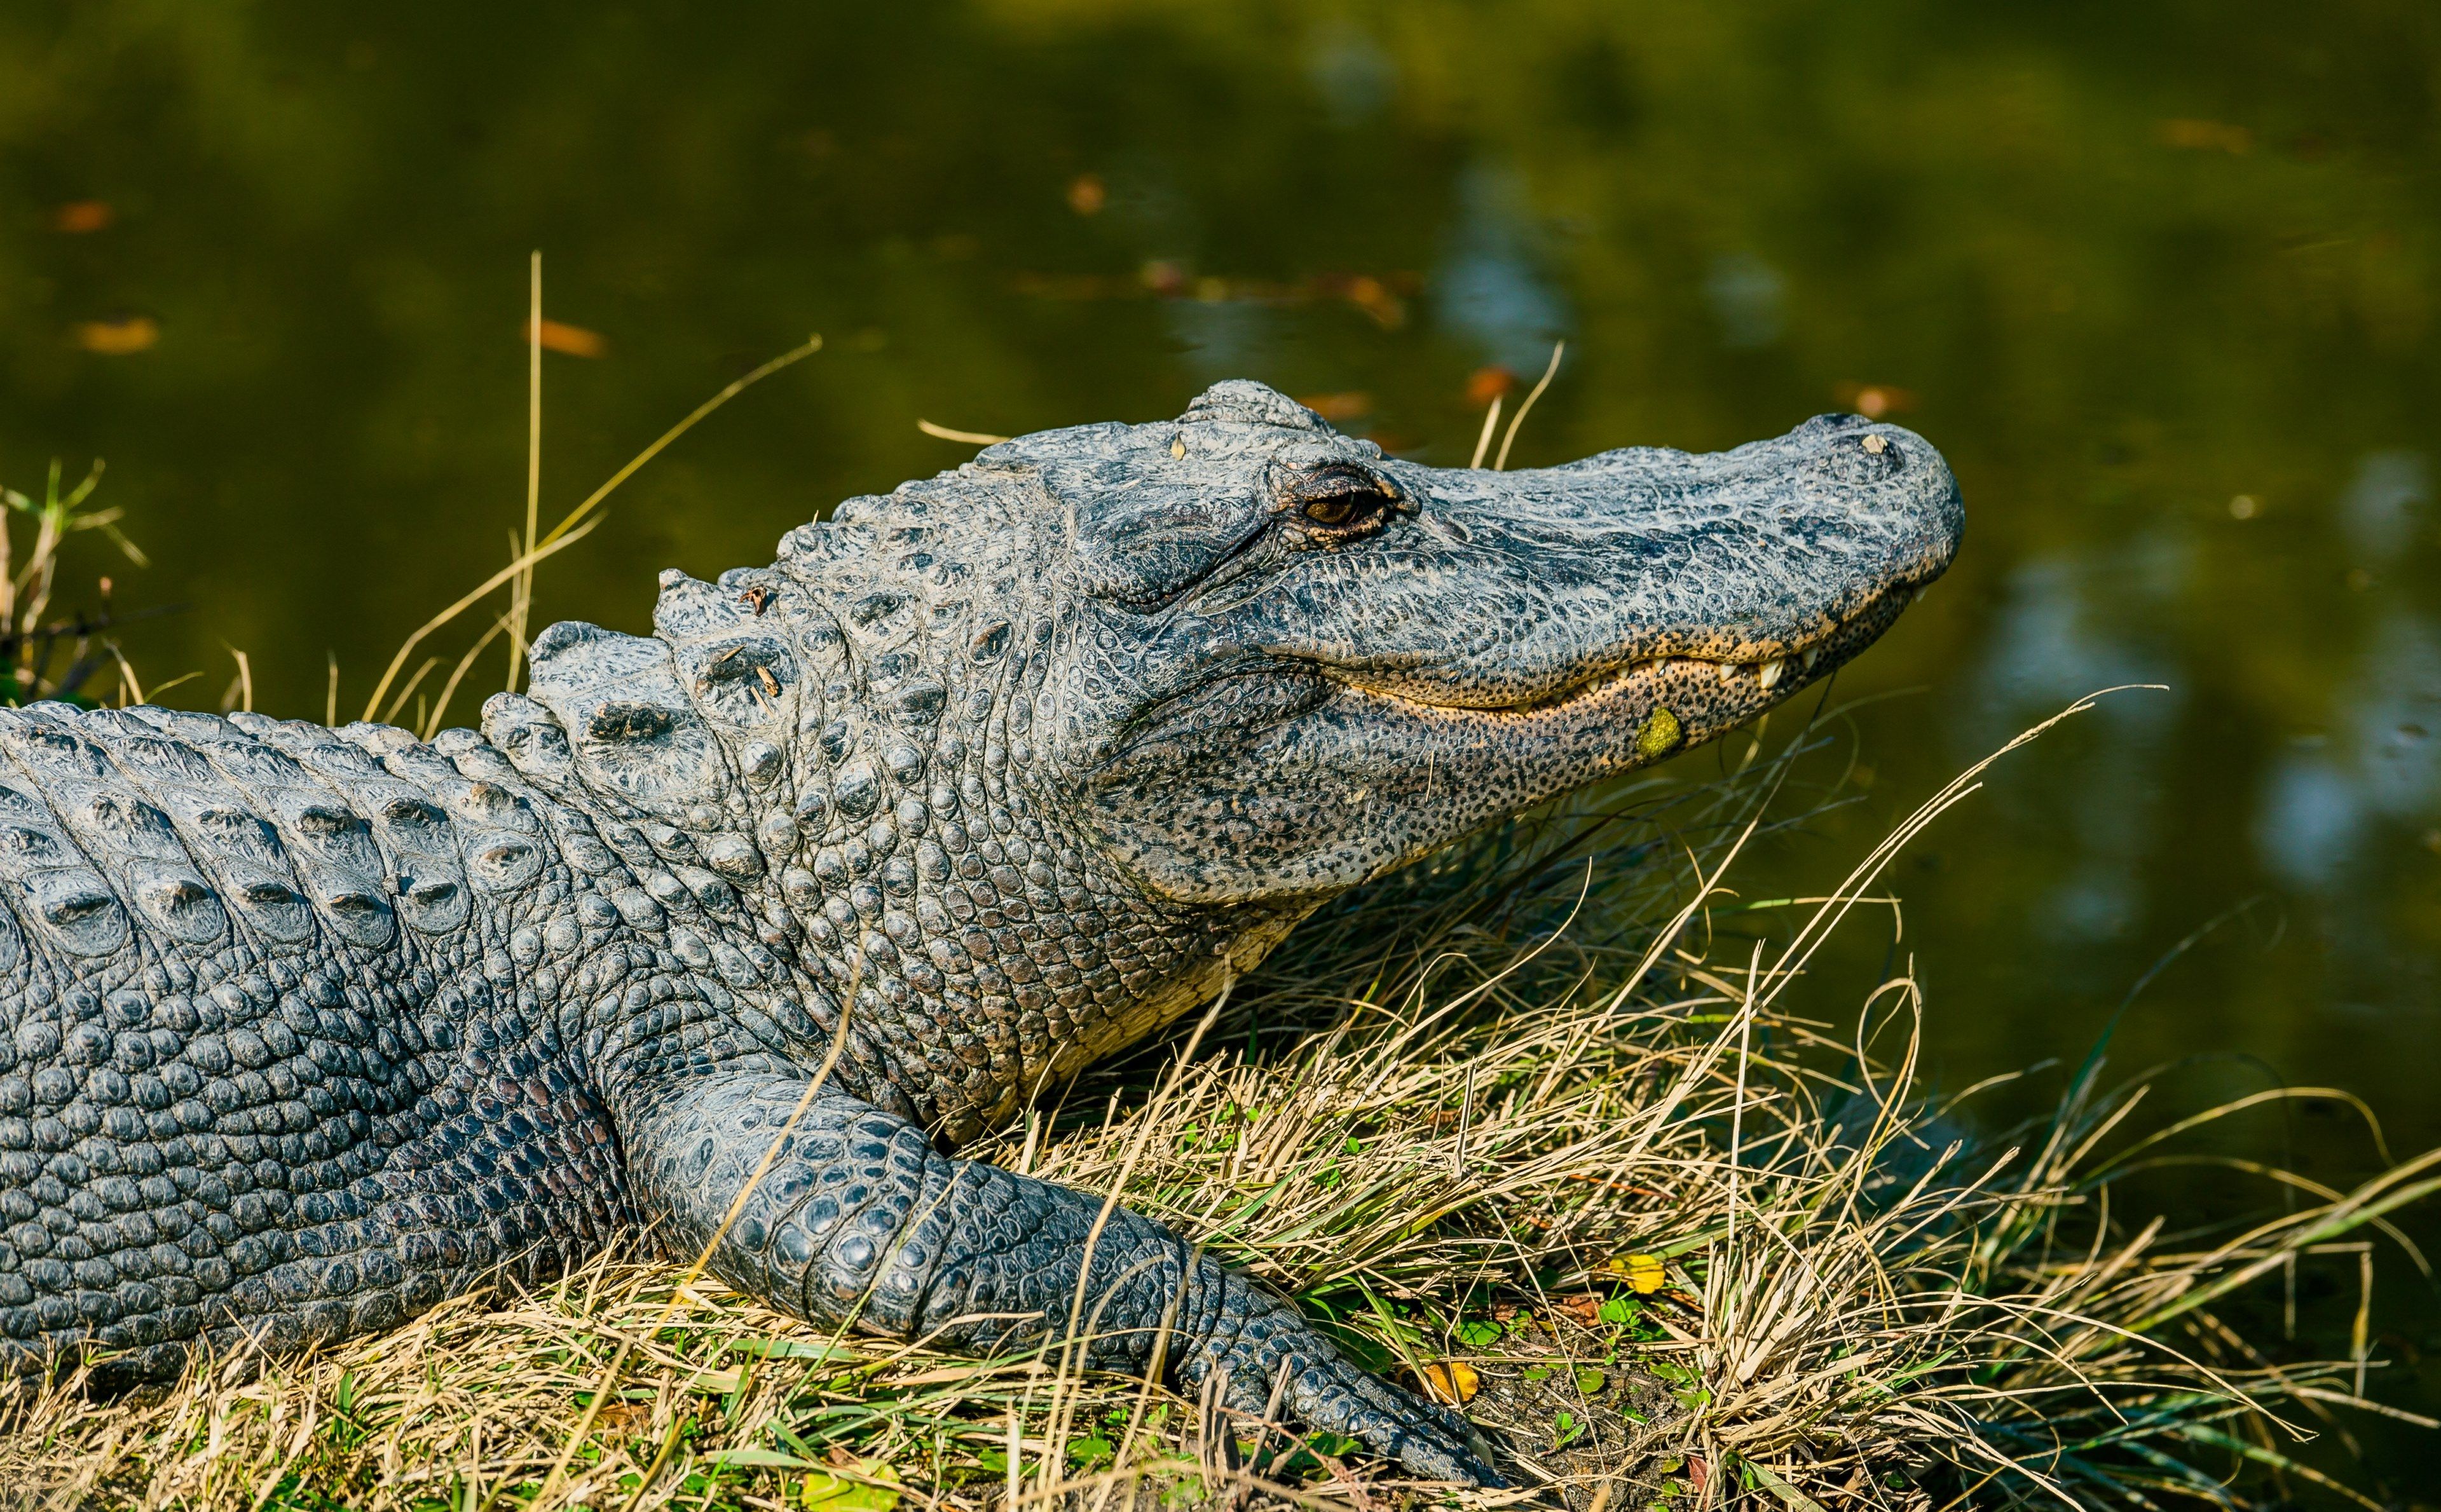 Wallpaper / alligator on the grass by the water at alligator adventure, wild alligator 4k wallpaper